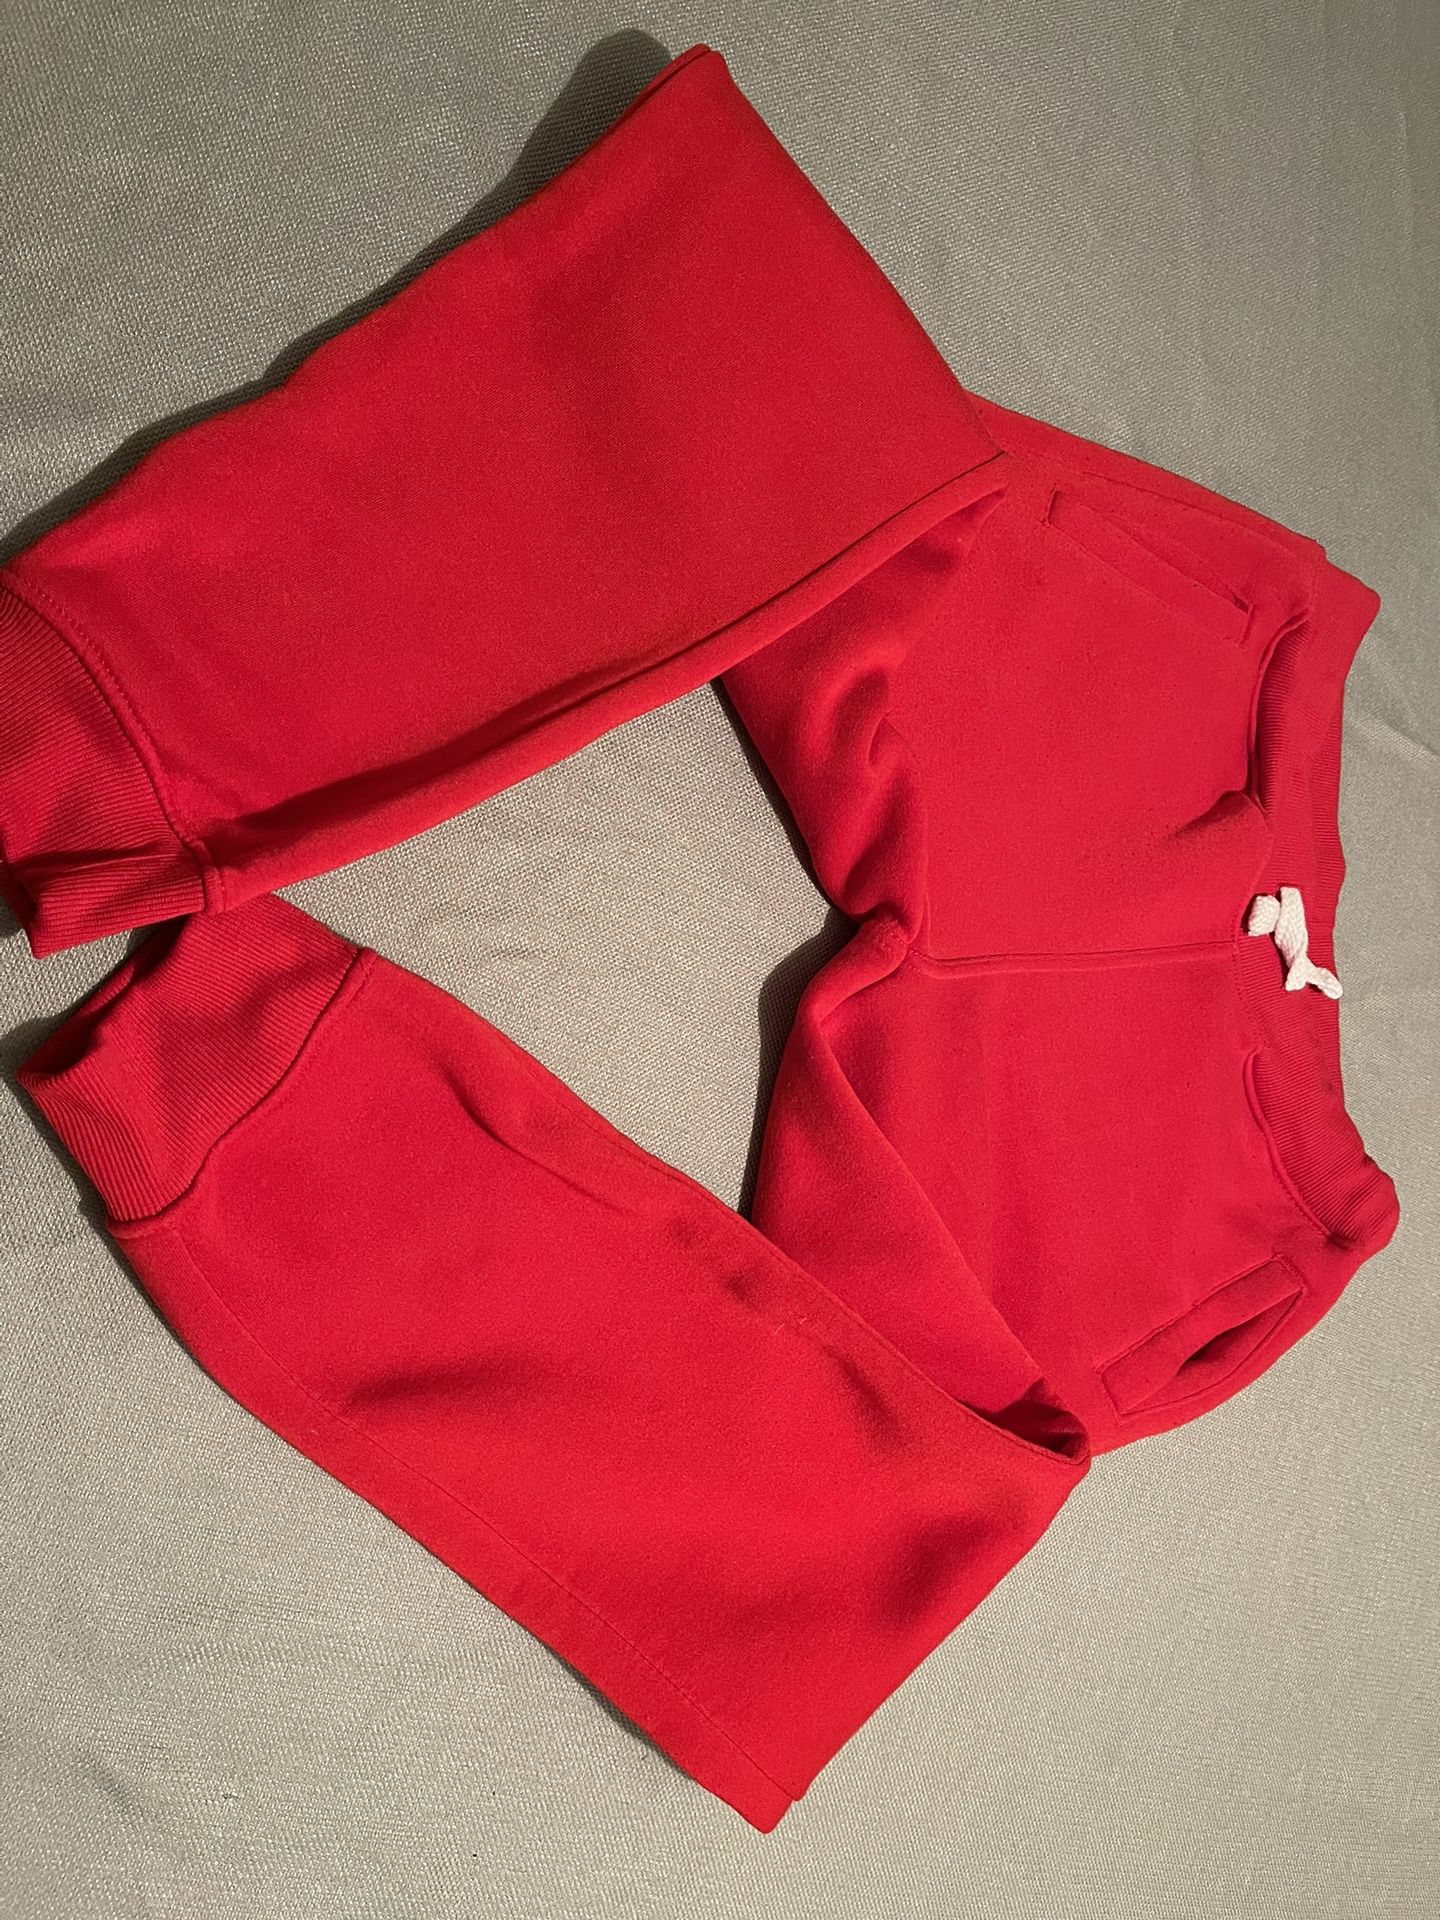 South Pole Authentic Collection Boys Active Fleece Red Jogger Pants Size XL (18-20)